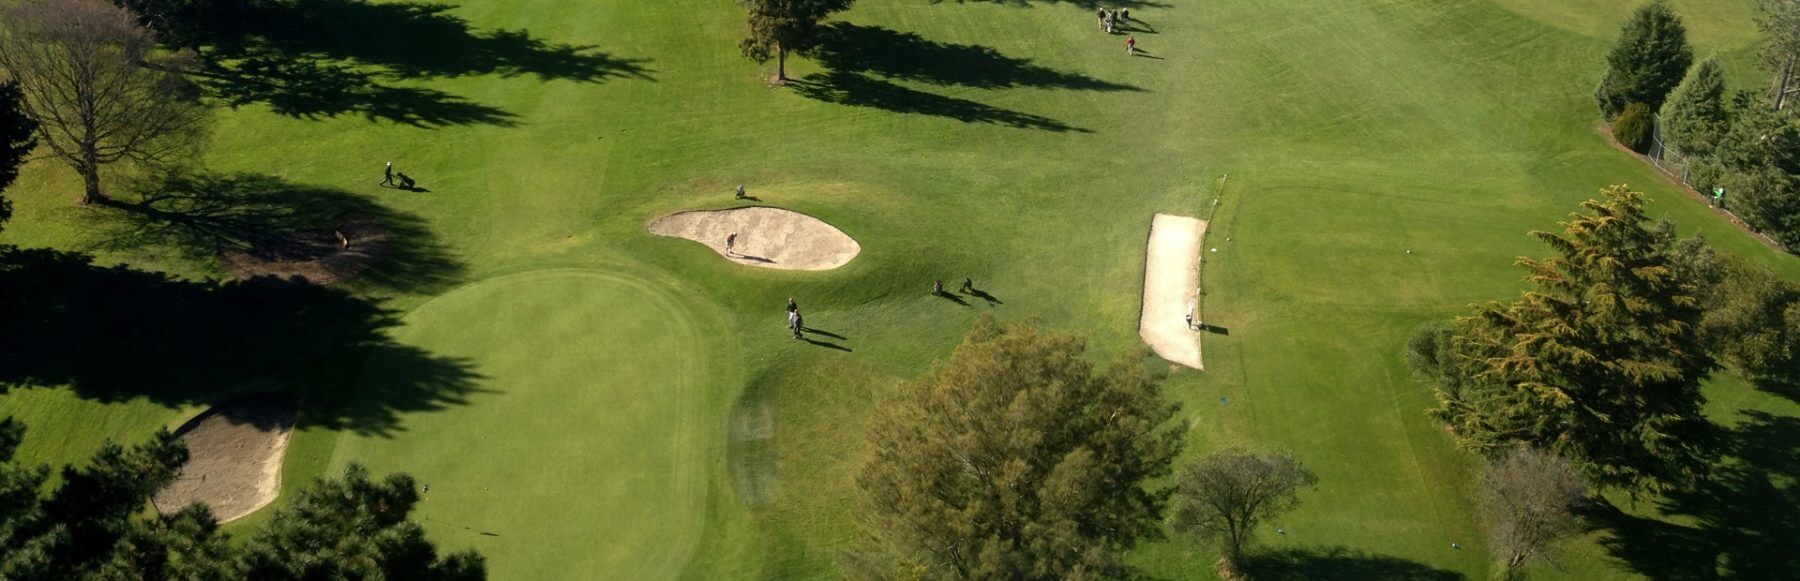 Aerial view of golfers on a green at Napier golf course